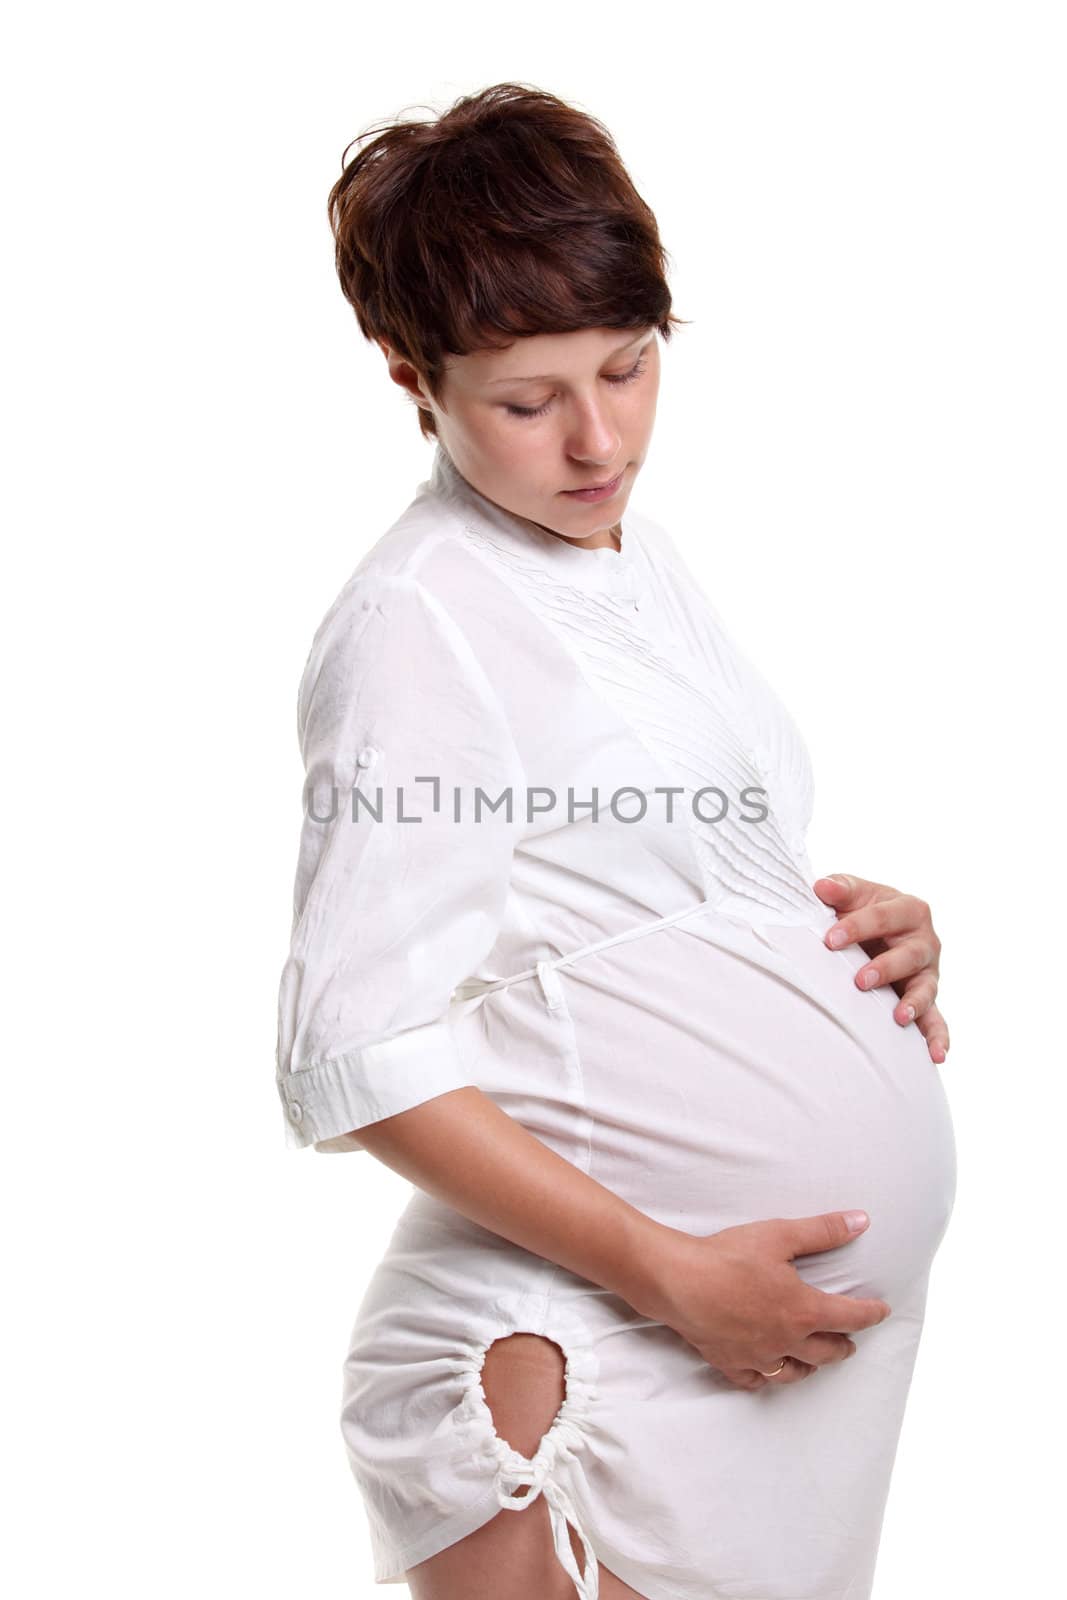 Pregnant young woman in a white shirt on the white background
